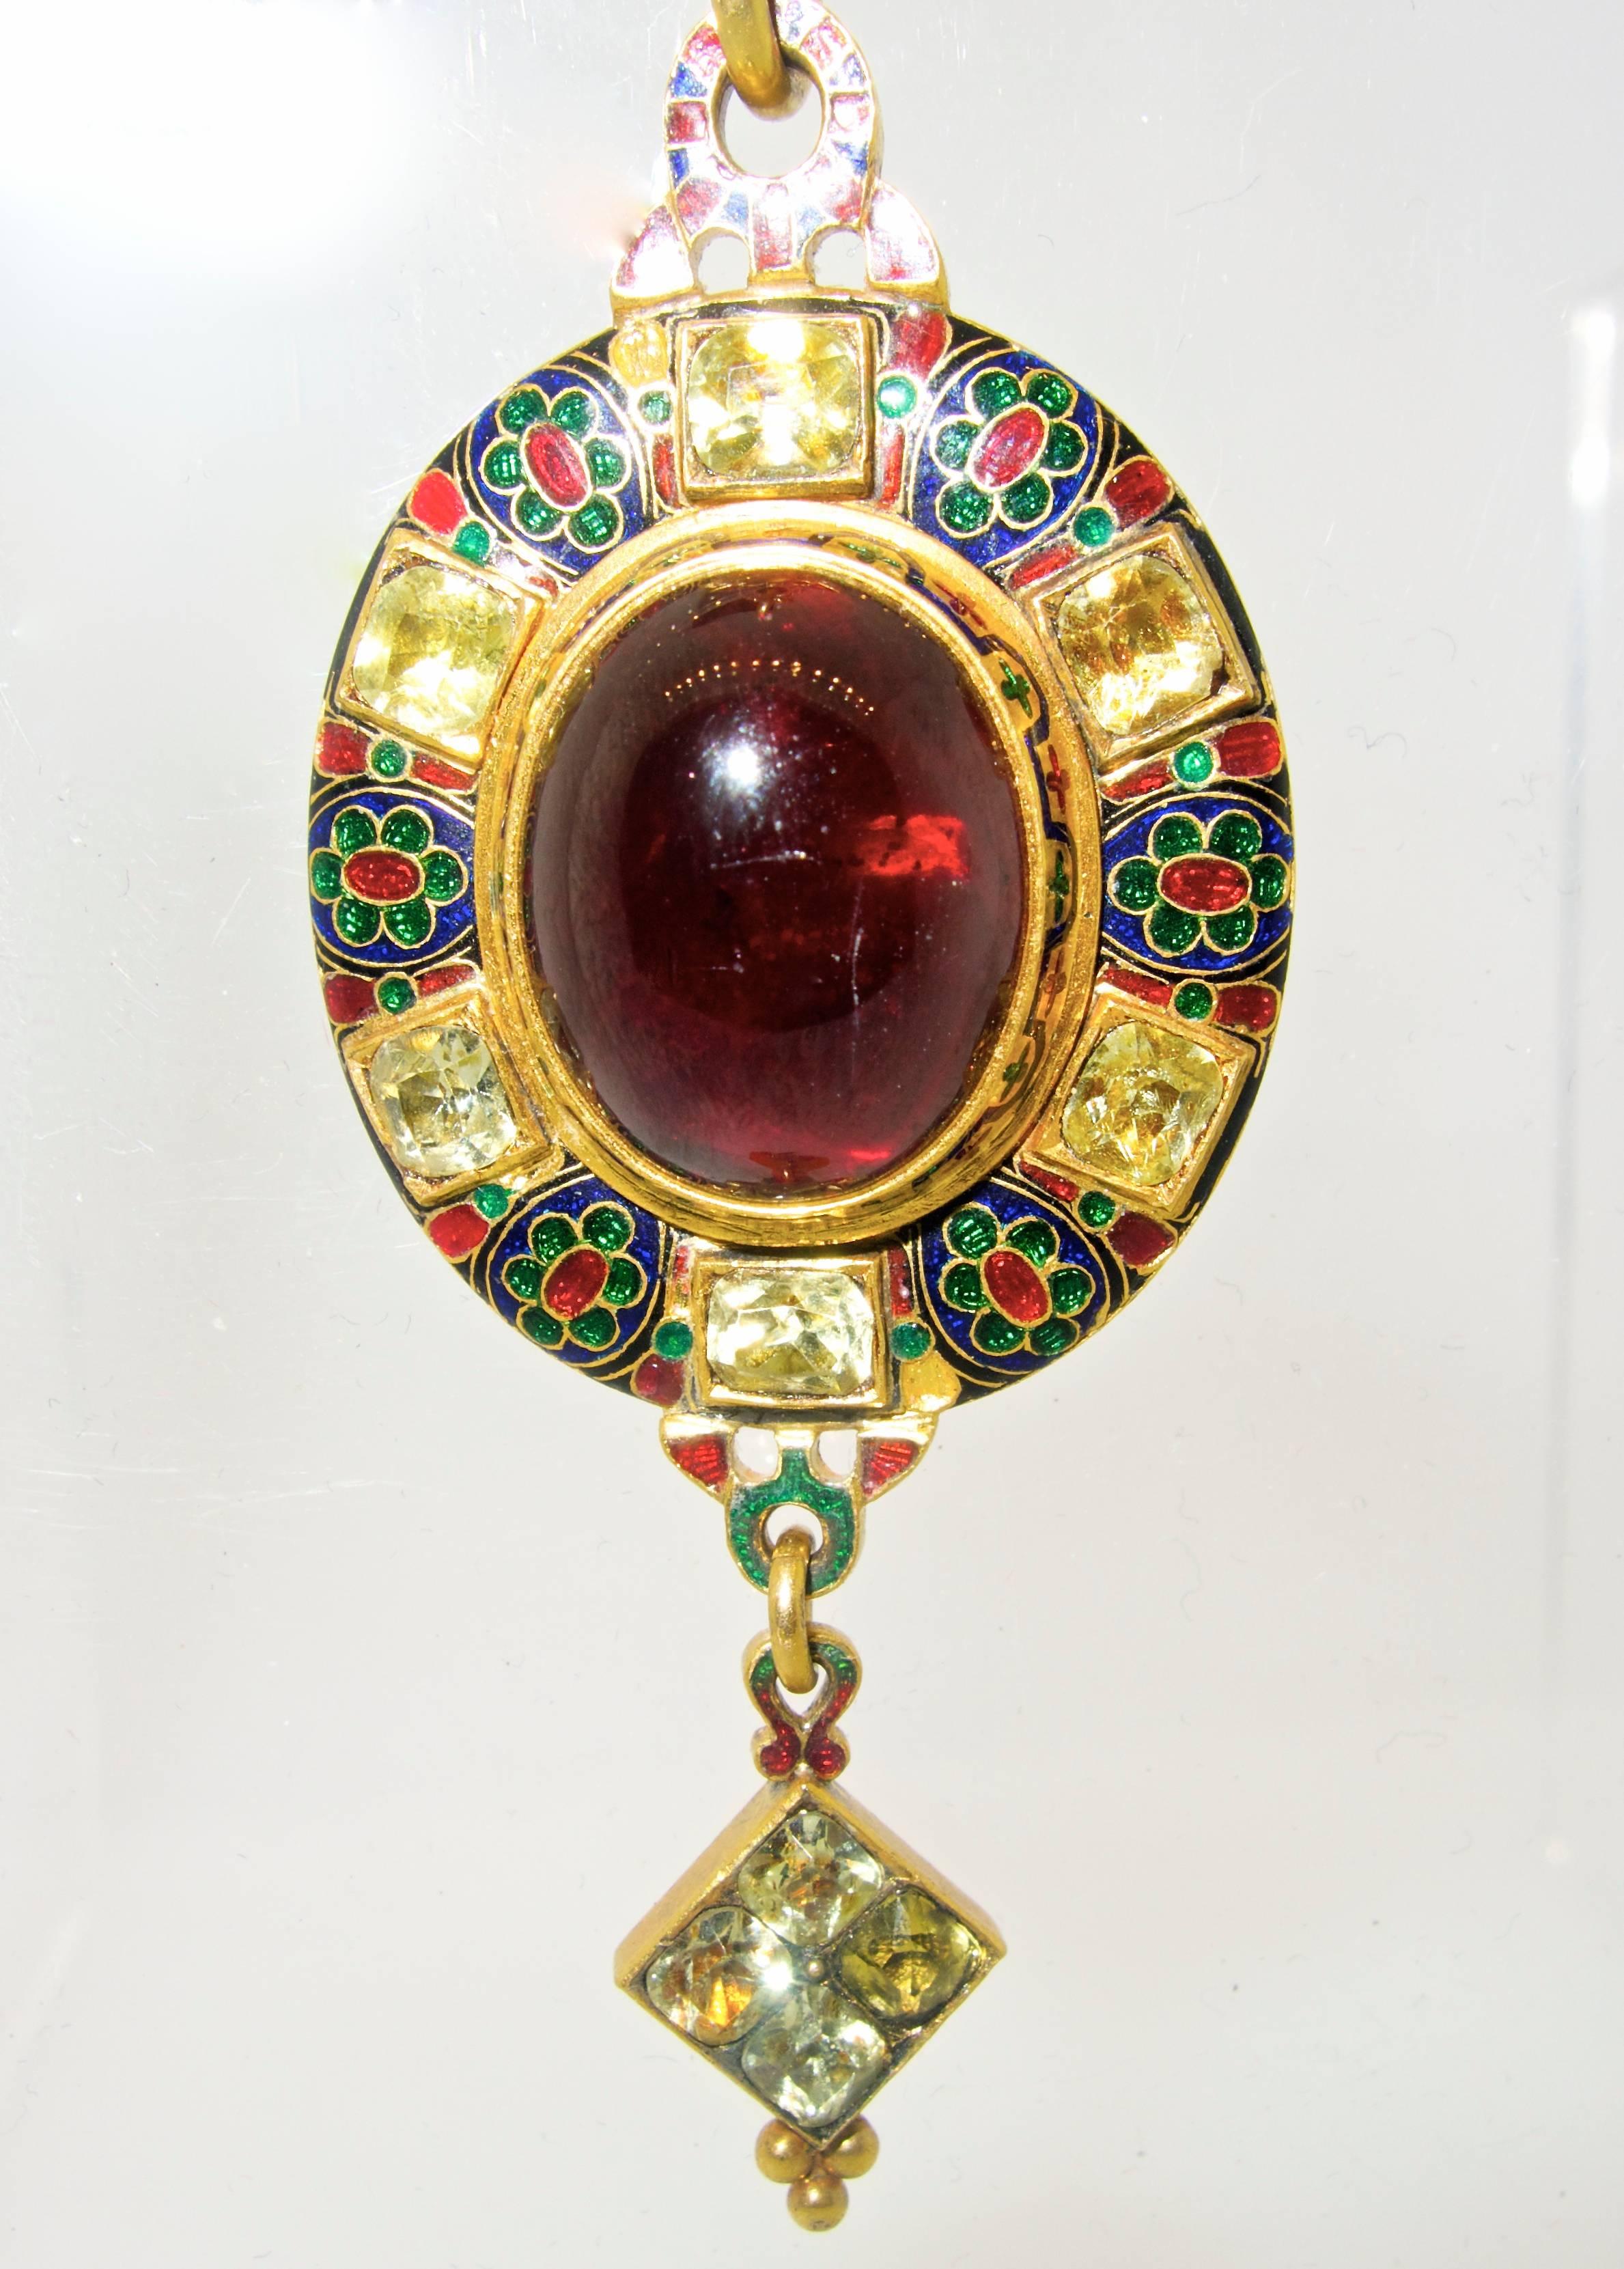 Also referred to as Holbeinesque jewelry, because similar pieces can be seen in many of his paintings, this pendant necklace and earrings centers an oval cabachon cut deep red garnet surrounded by colorful enamel and antique cut chrysoberyl stones. 